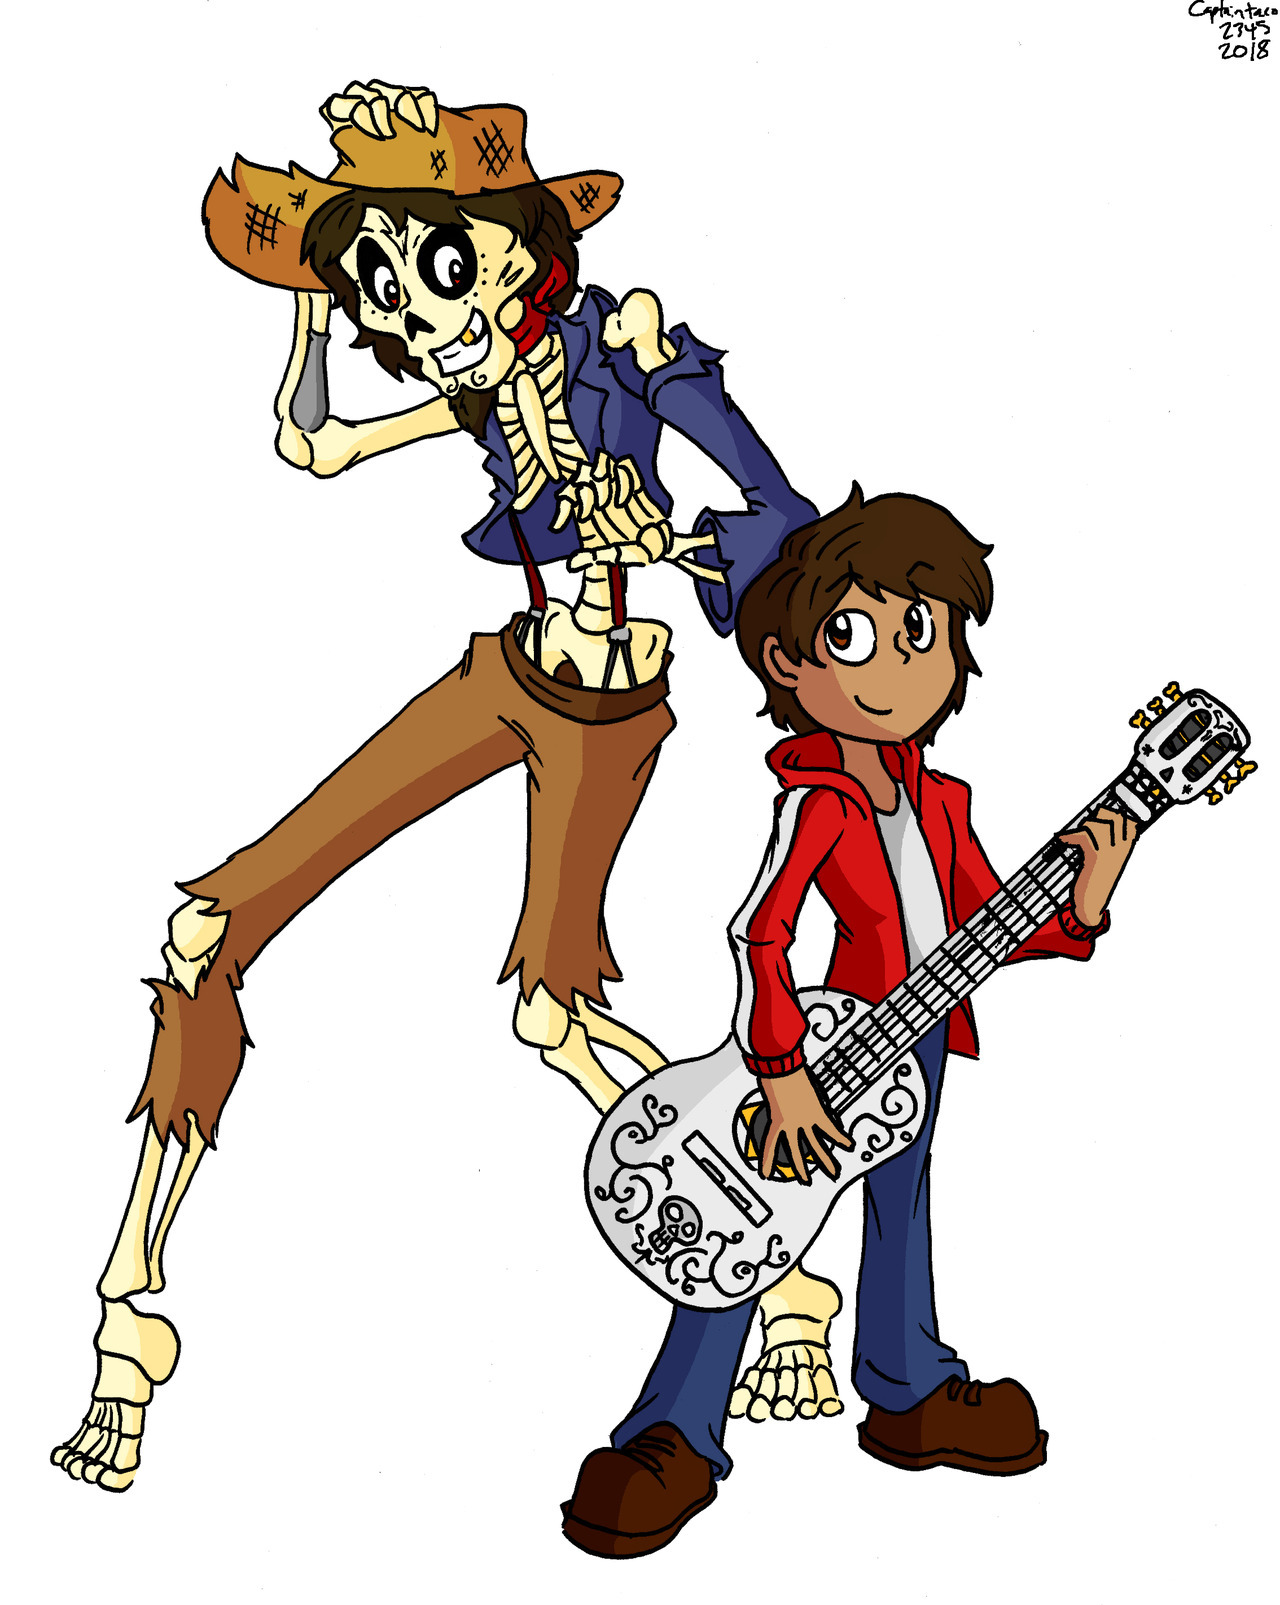 Miguel and Hector from Coco. I meant to draw this a while ago, and I figured that